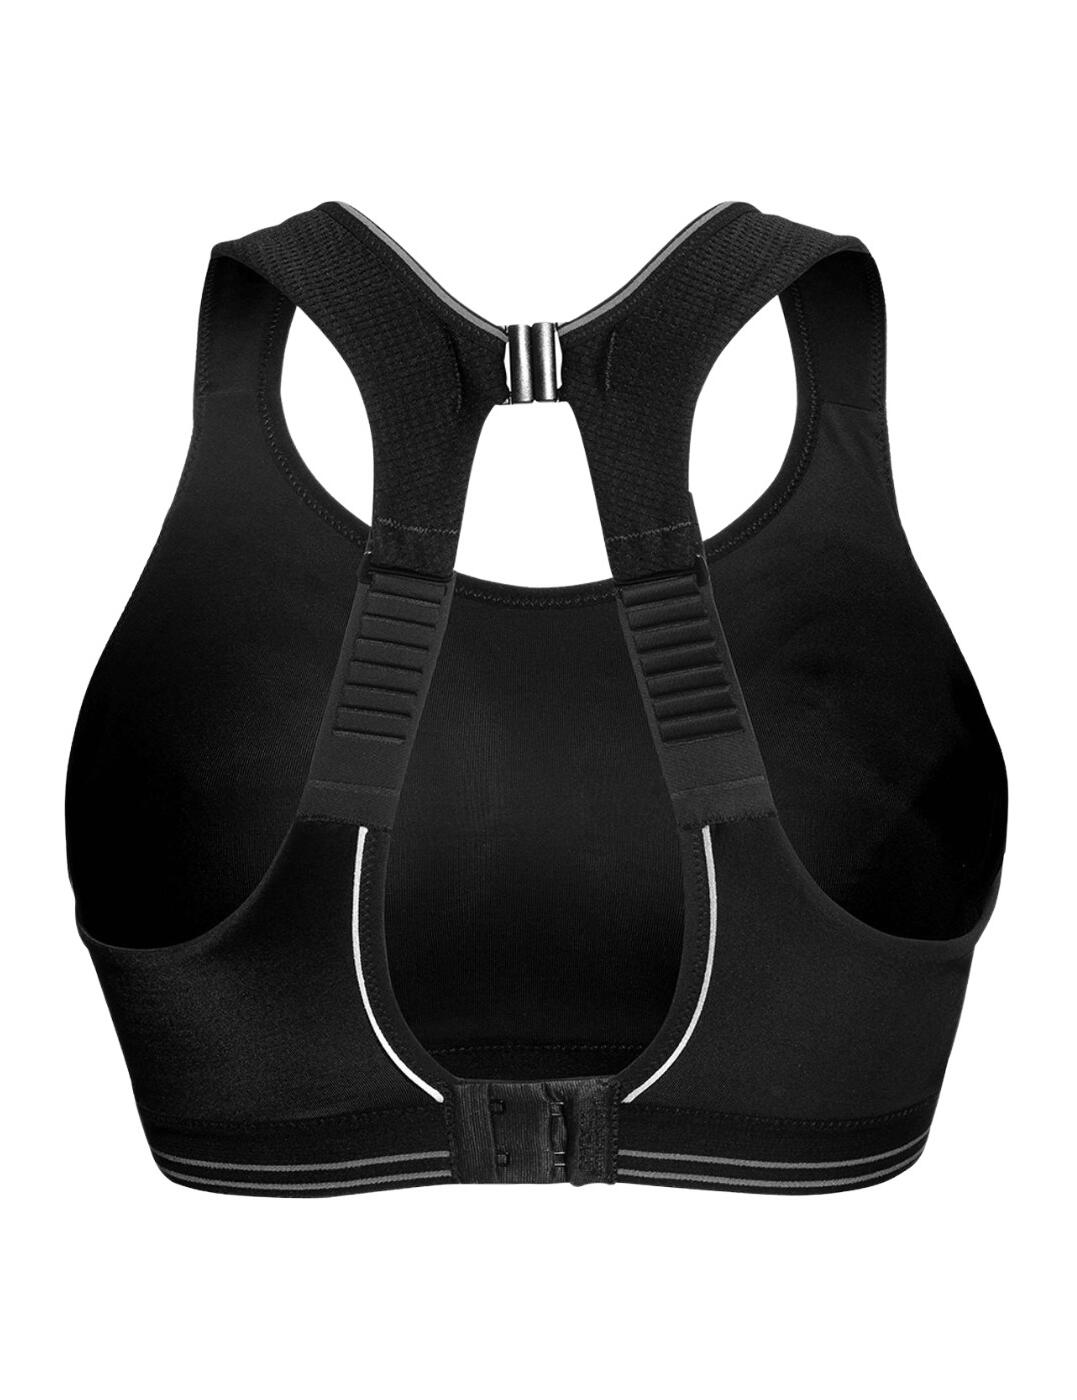 Shock Absorber Ultimate Run Sports Bra S5044 White 34c for sale online